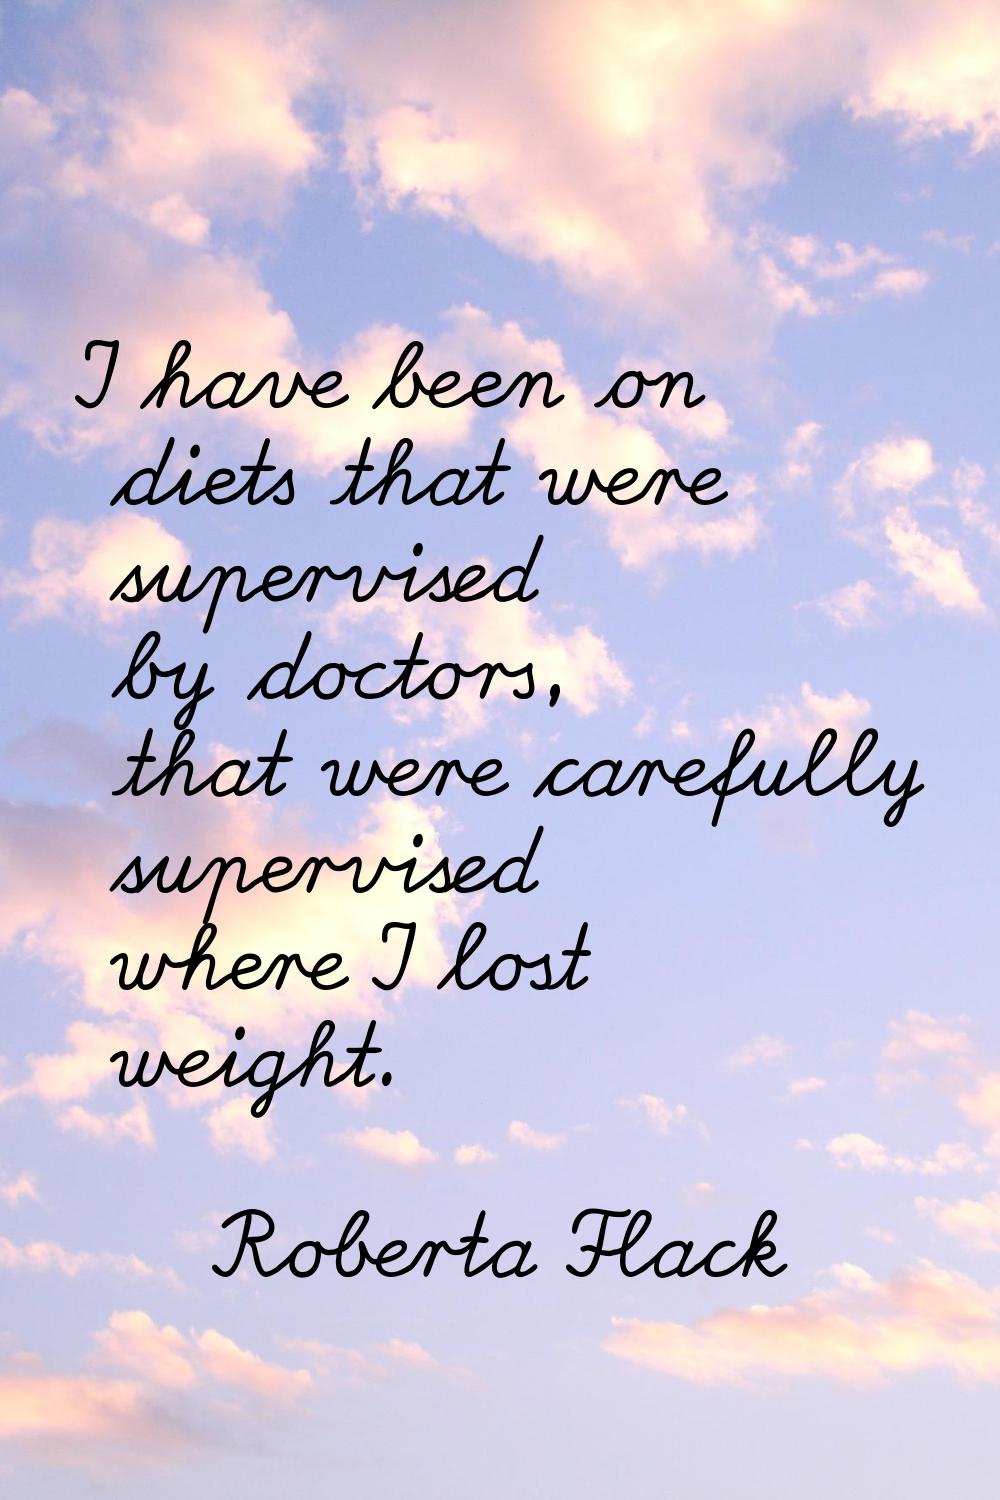 I have been on diets that were supervised by doctors, that were carefully supervised where I lost w